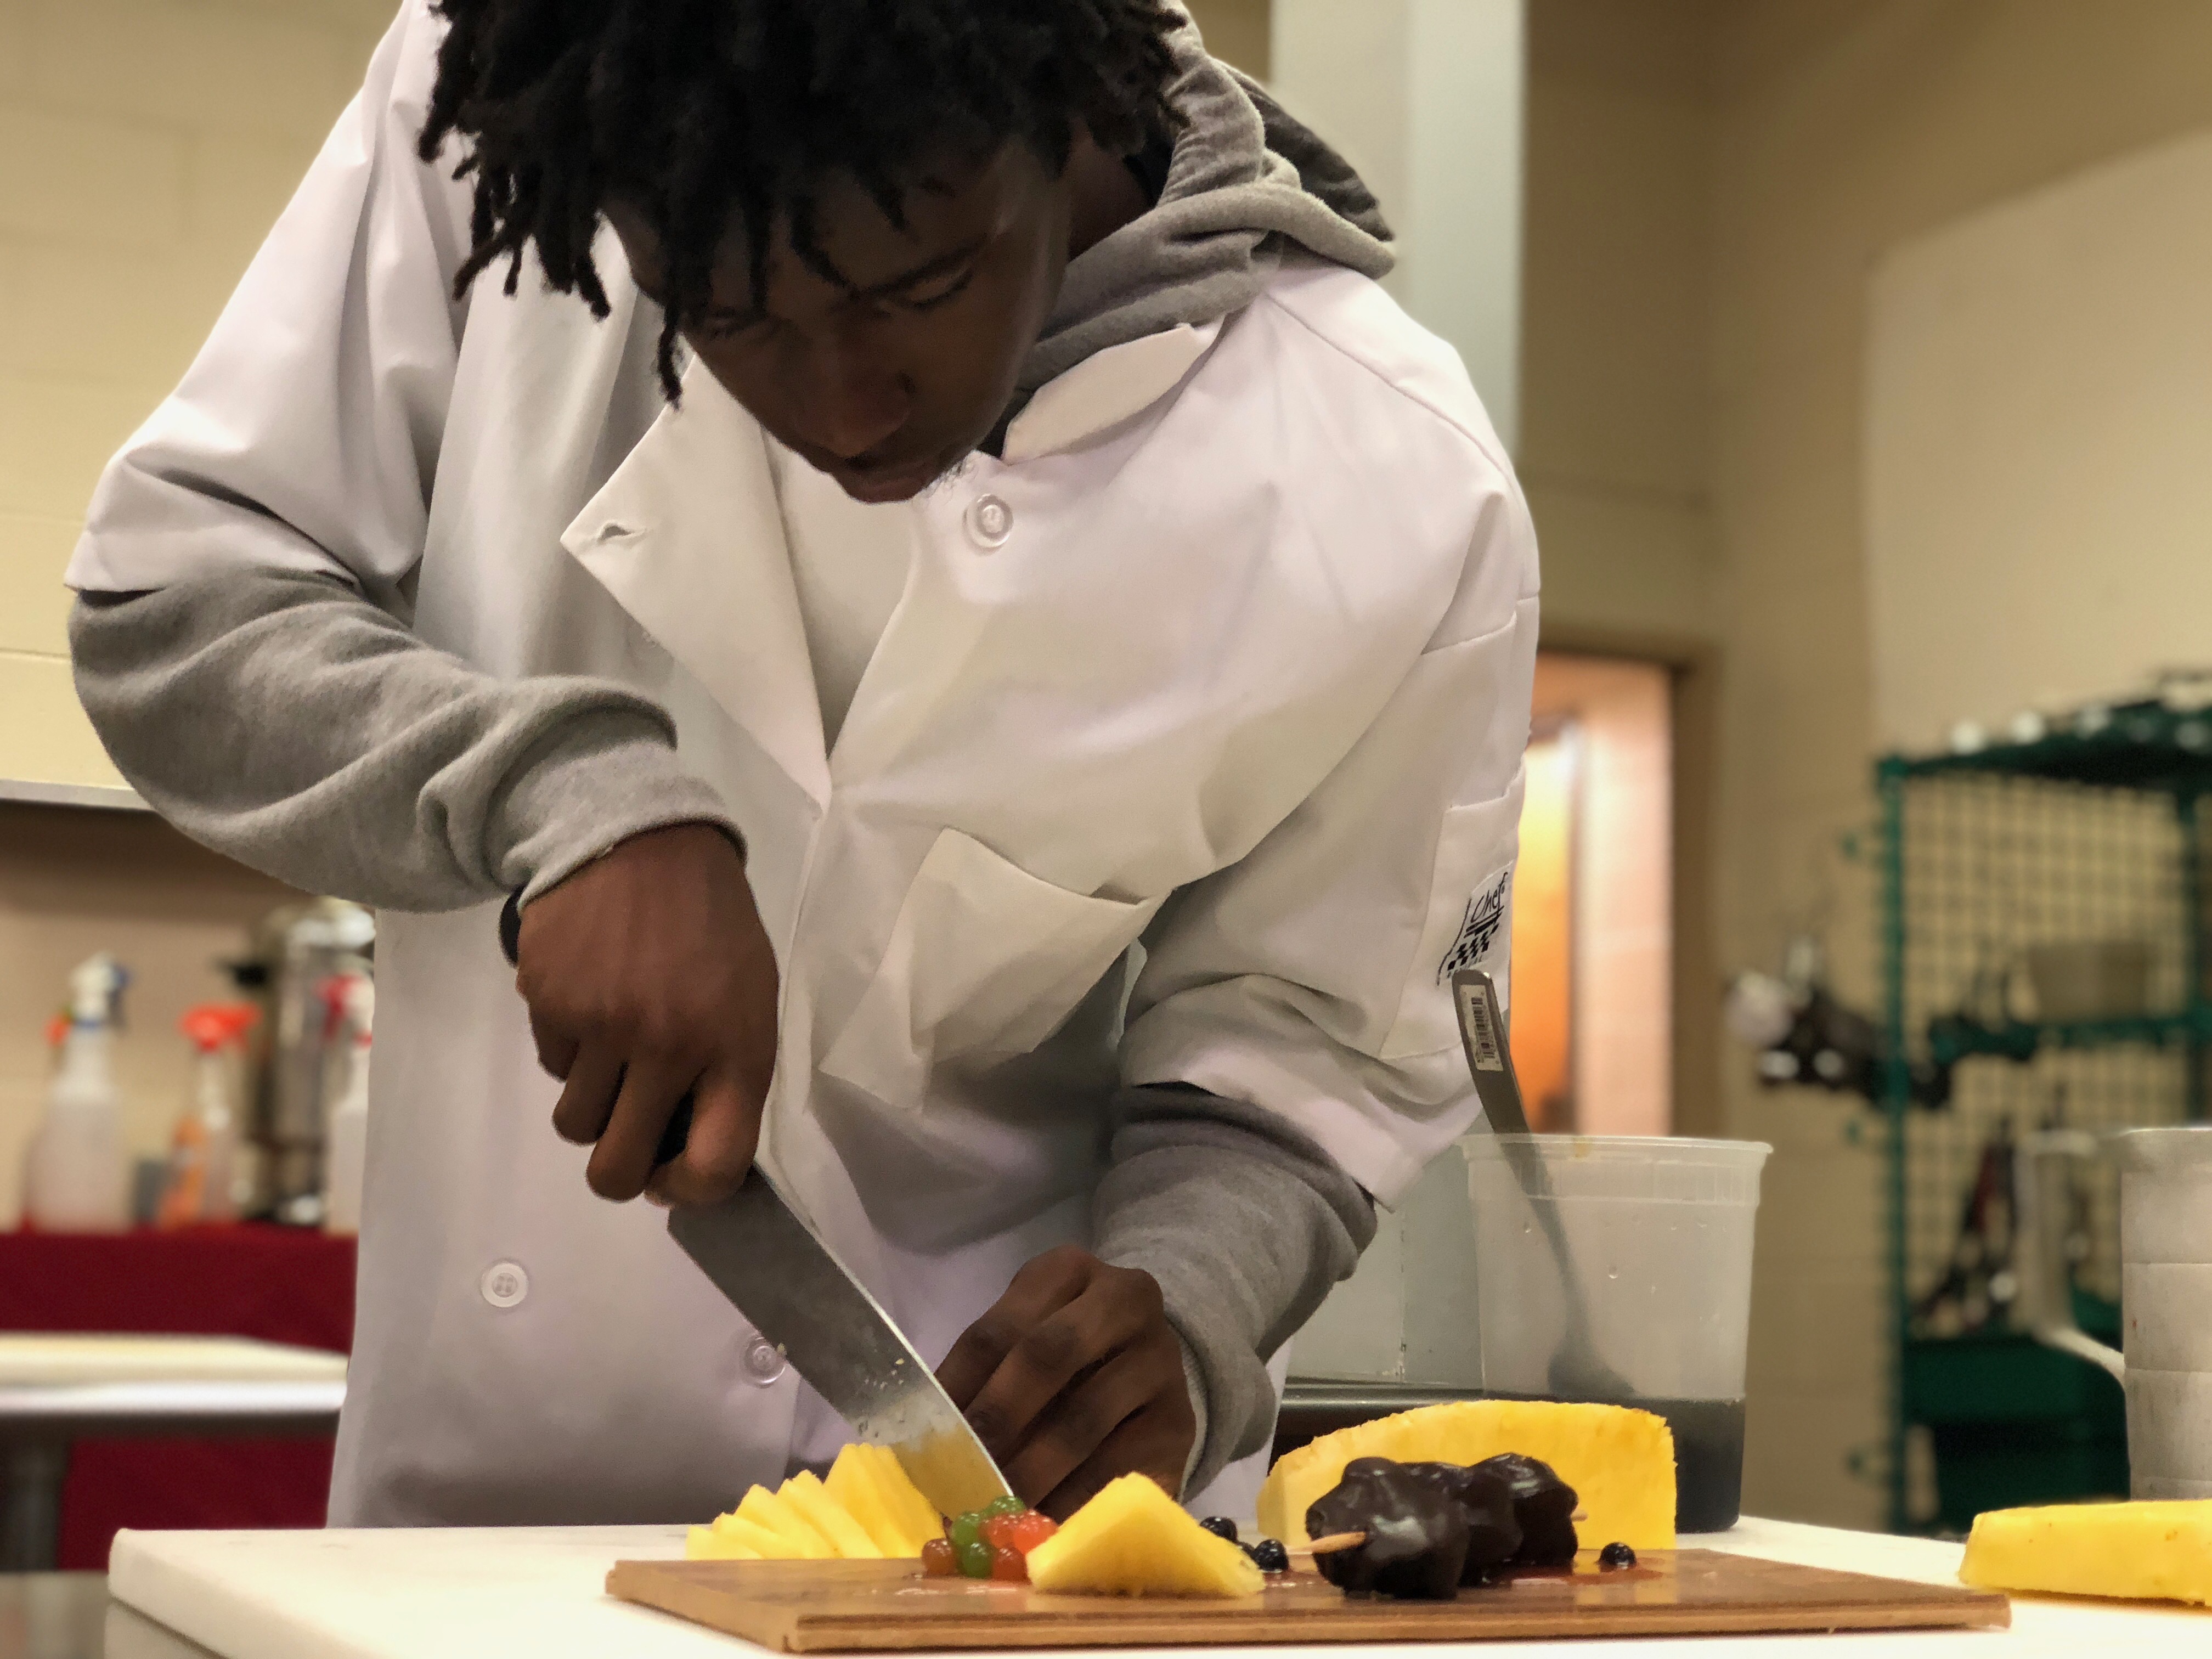 Students learn to prepare fresh ingredients for the kitchen.